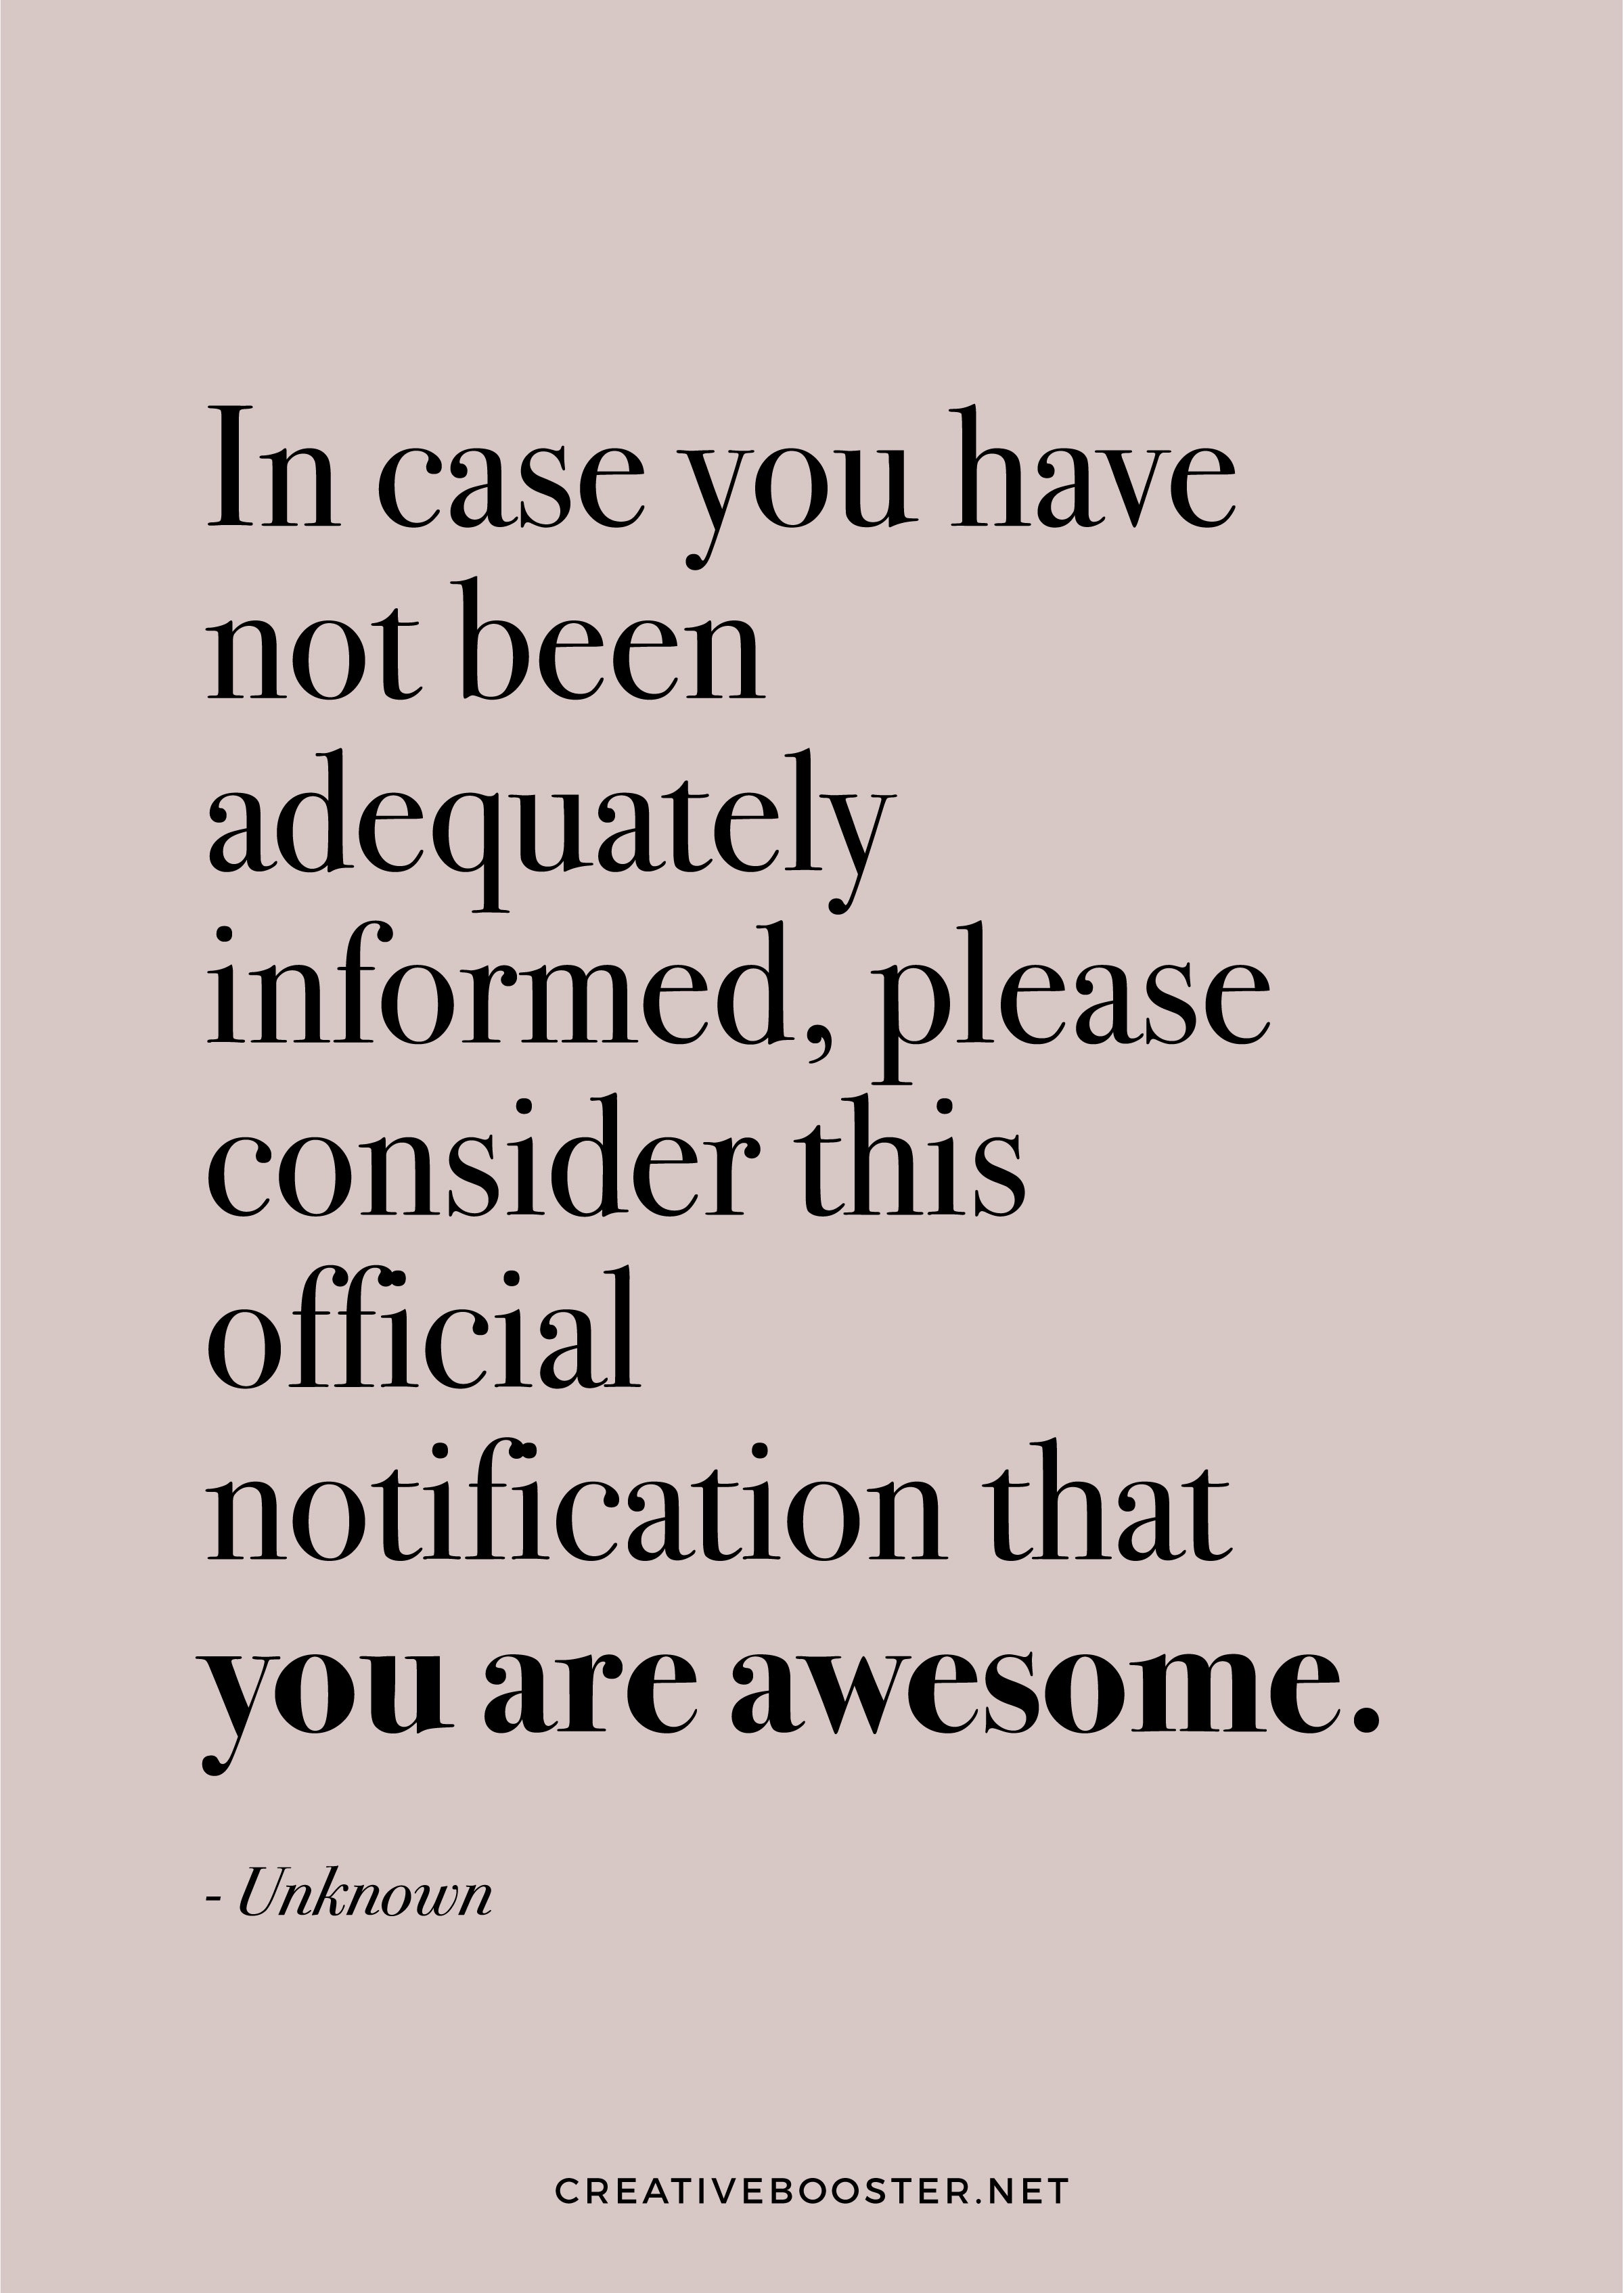 Funny-You-Are-Amazing-Quotes---“In-case-you-have-not-been-adequately-informed,-please-consider-this-official-notification-that-you-are-awesome.”-–-Unknown-(Quote-Art-Print)